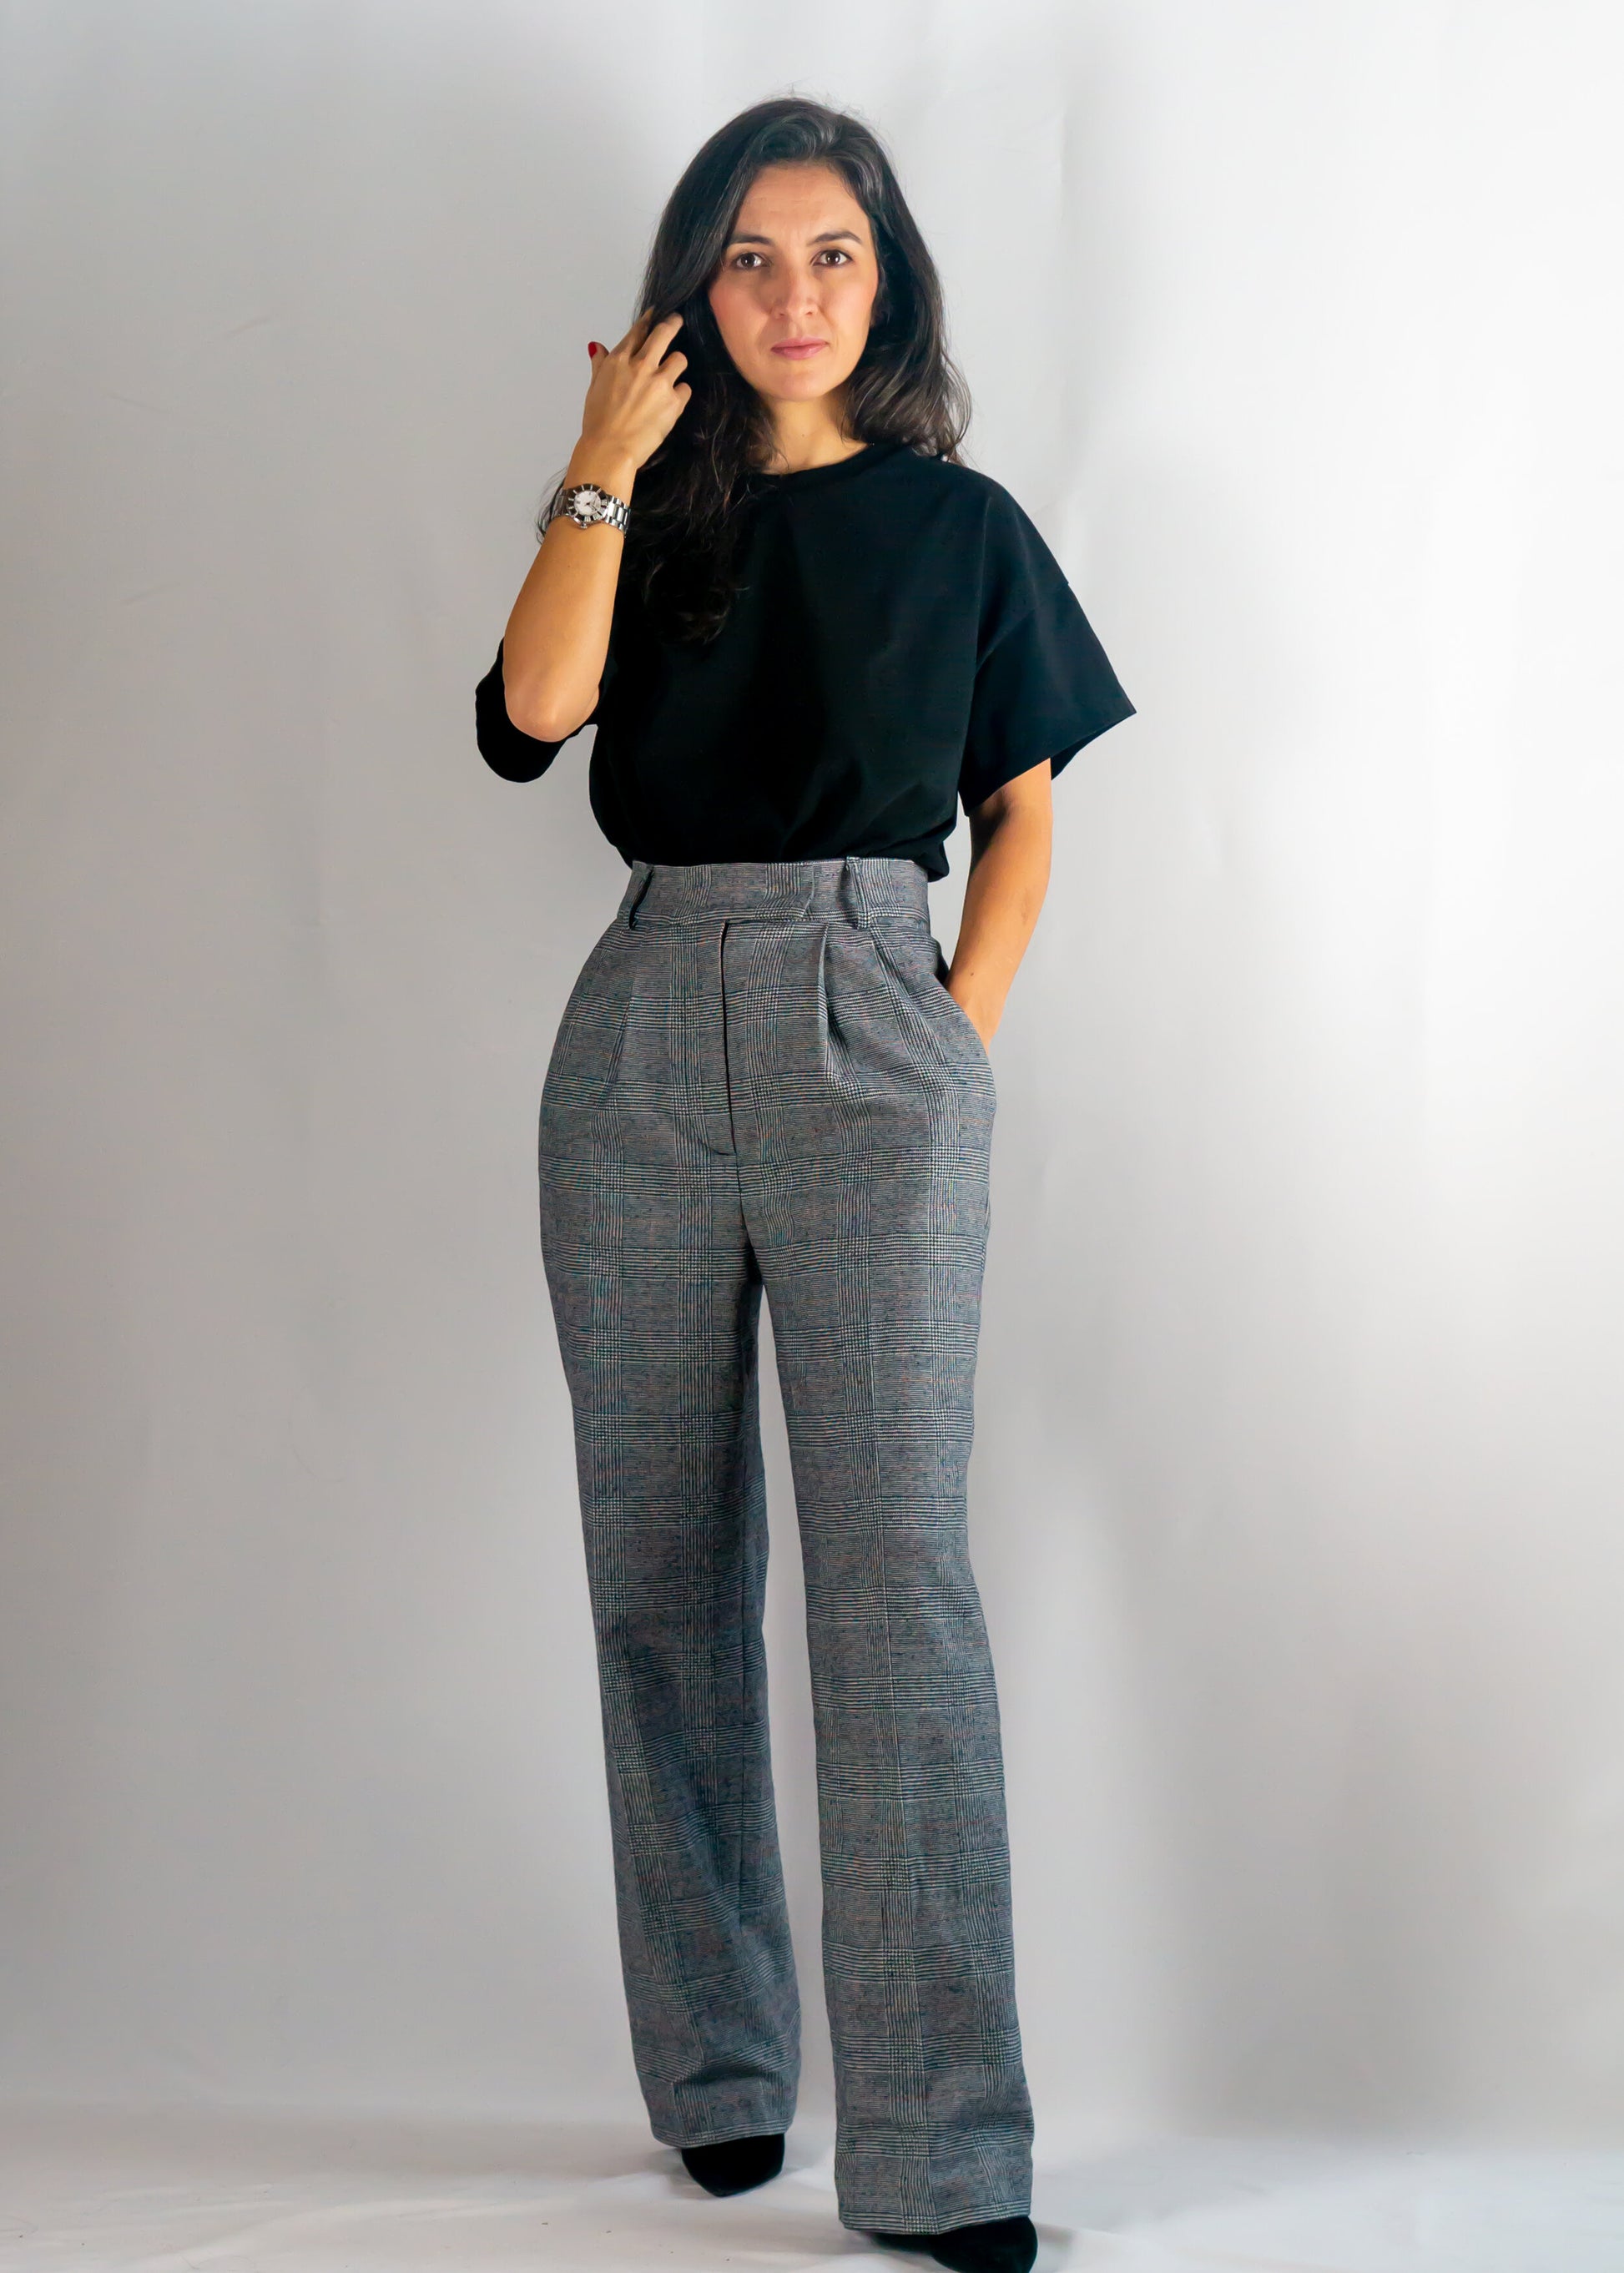 DIY Straight-Leg, High-Waisted Pants + Sewing Pattern by